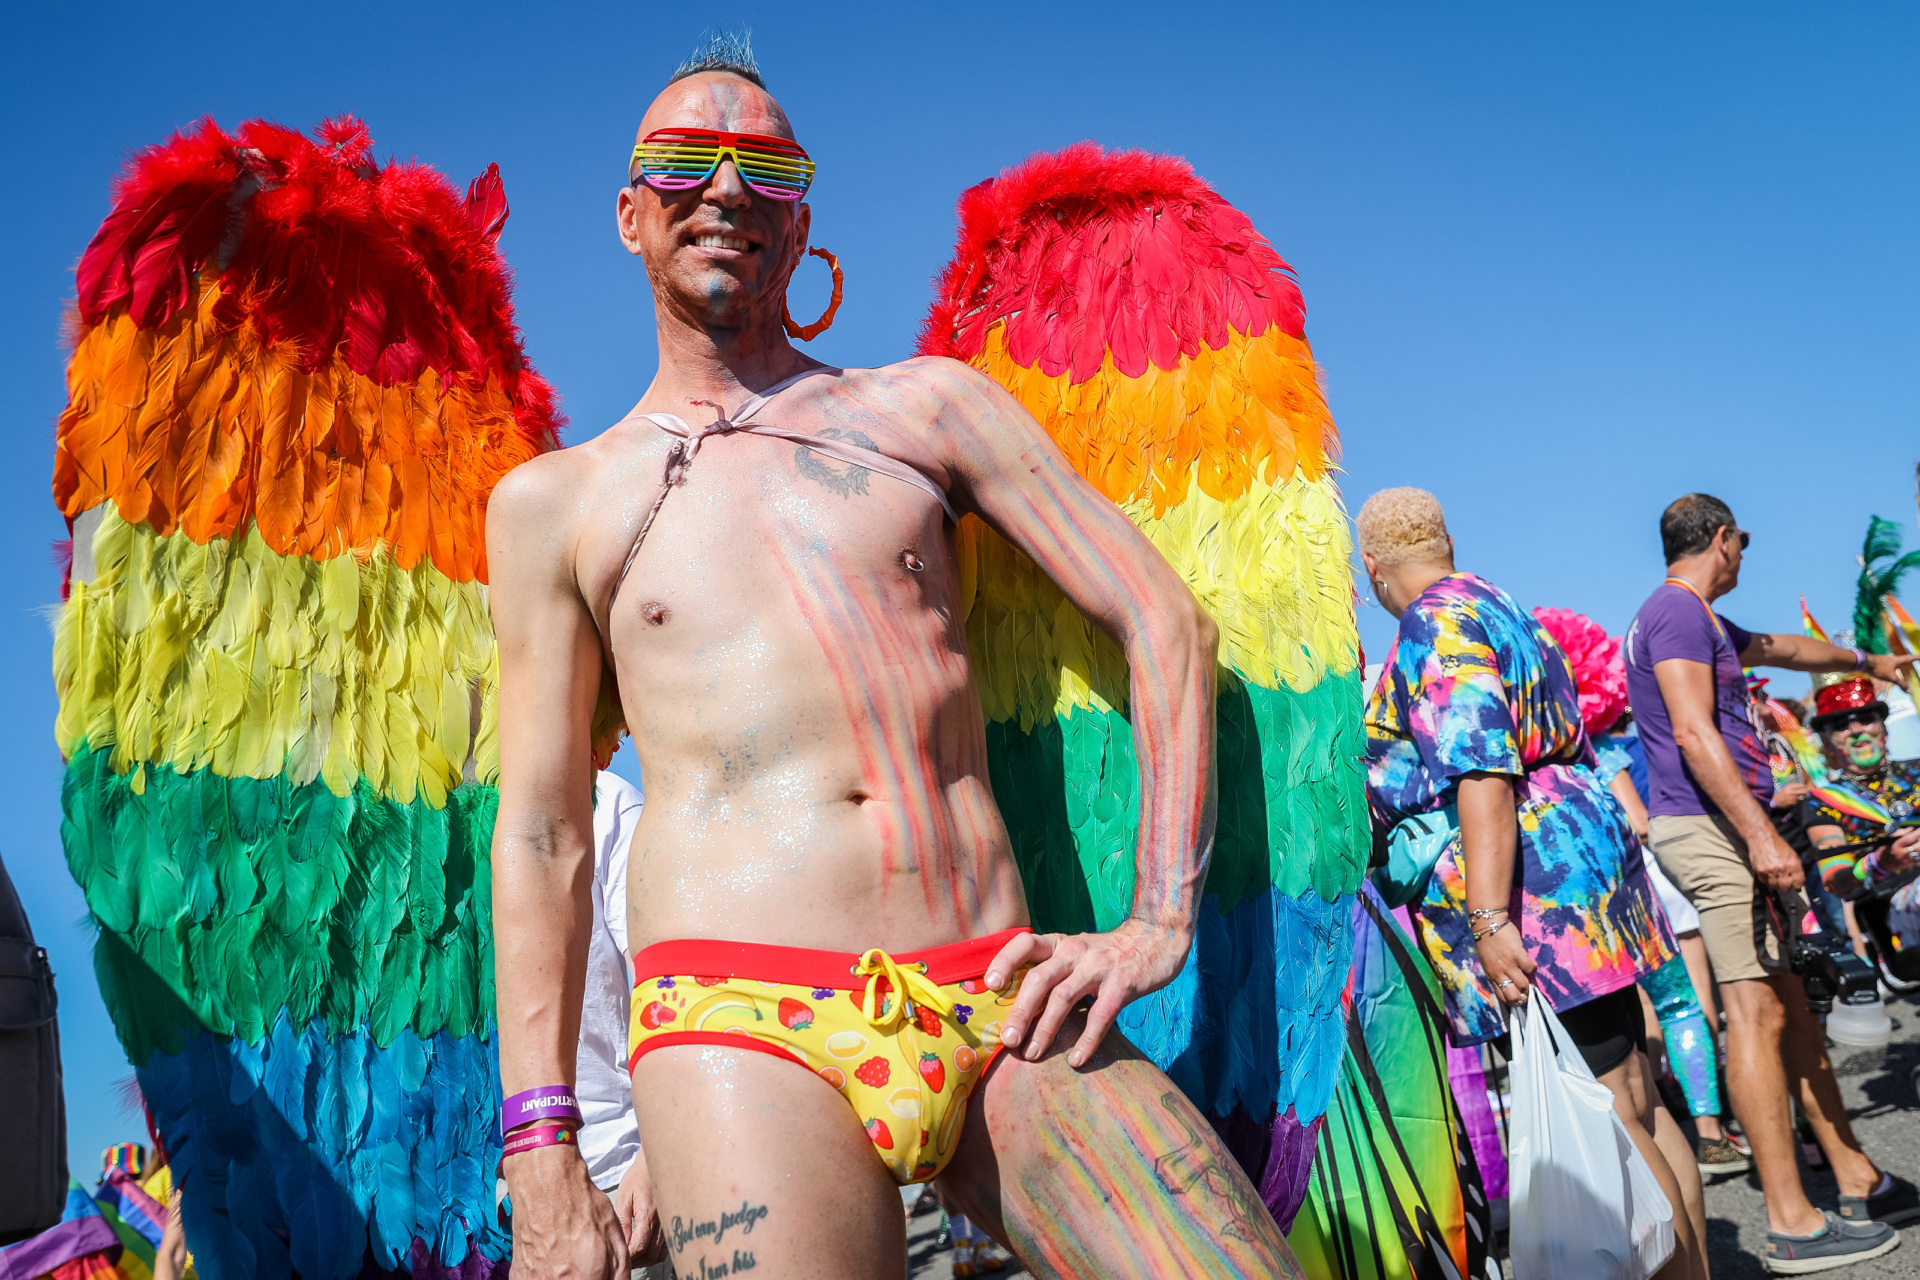  A festival goer poses at the Pride LGBTQ+ Community Parade – ‘Love, Protest & Unity’ during the Brighton Pride on August 06, 2022 in Brighton, England. (Photo by Tristan Fewings/Getty Images)